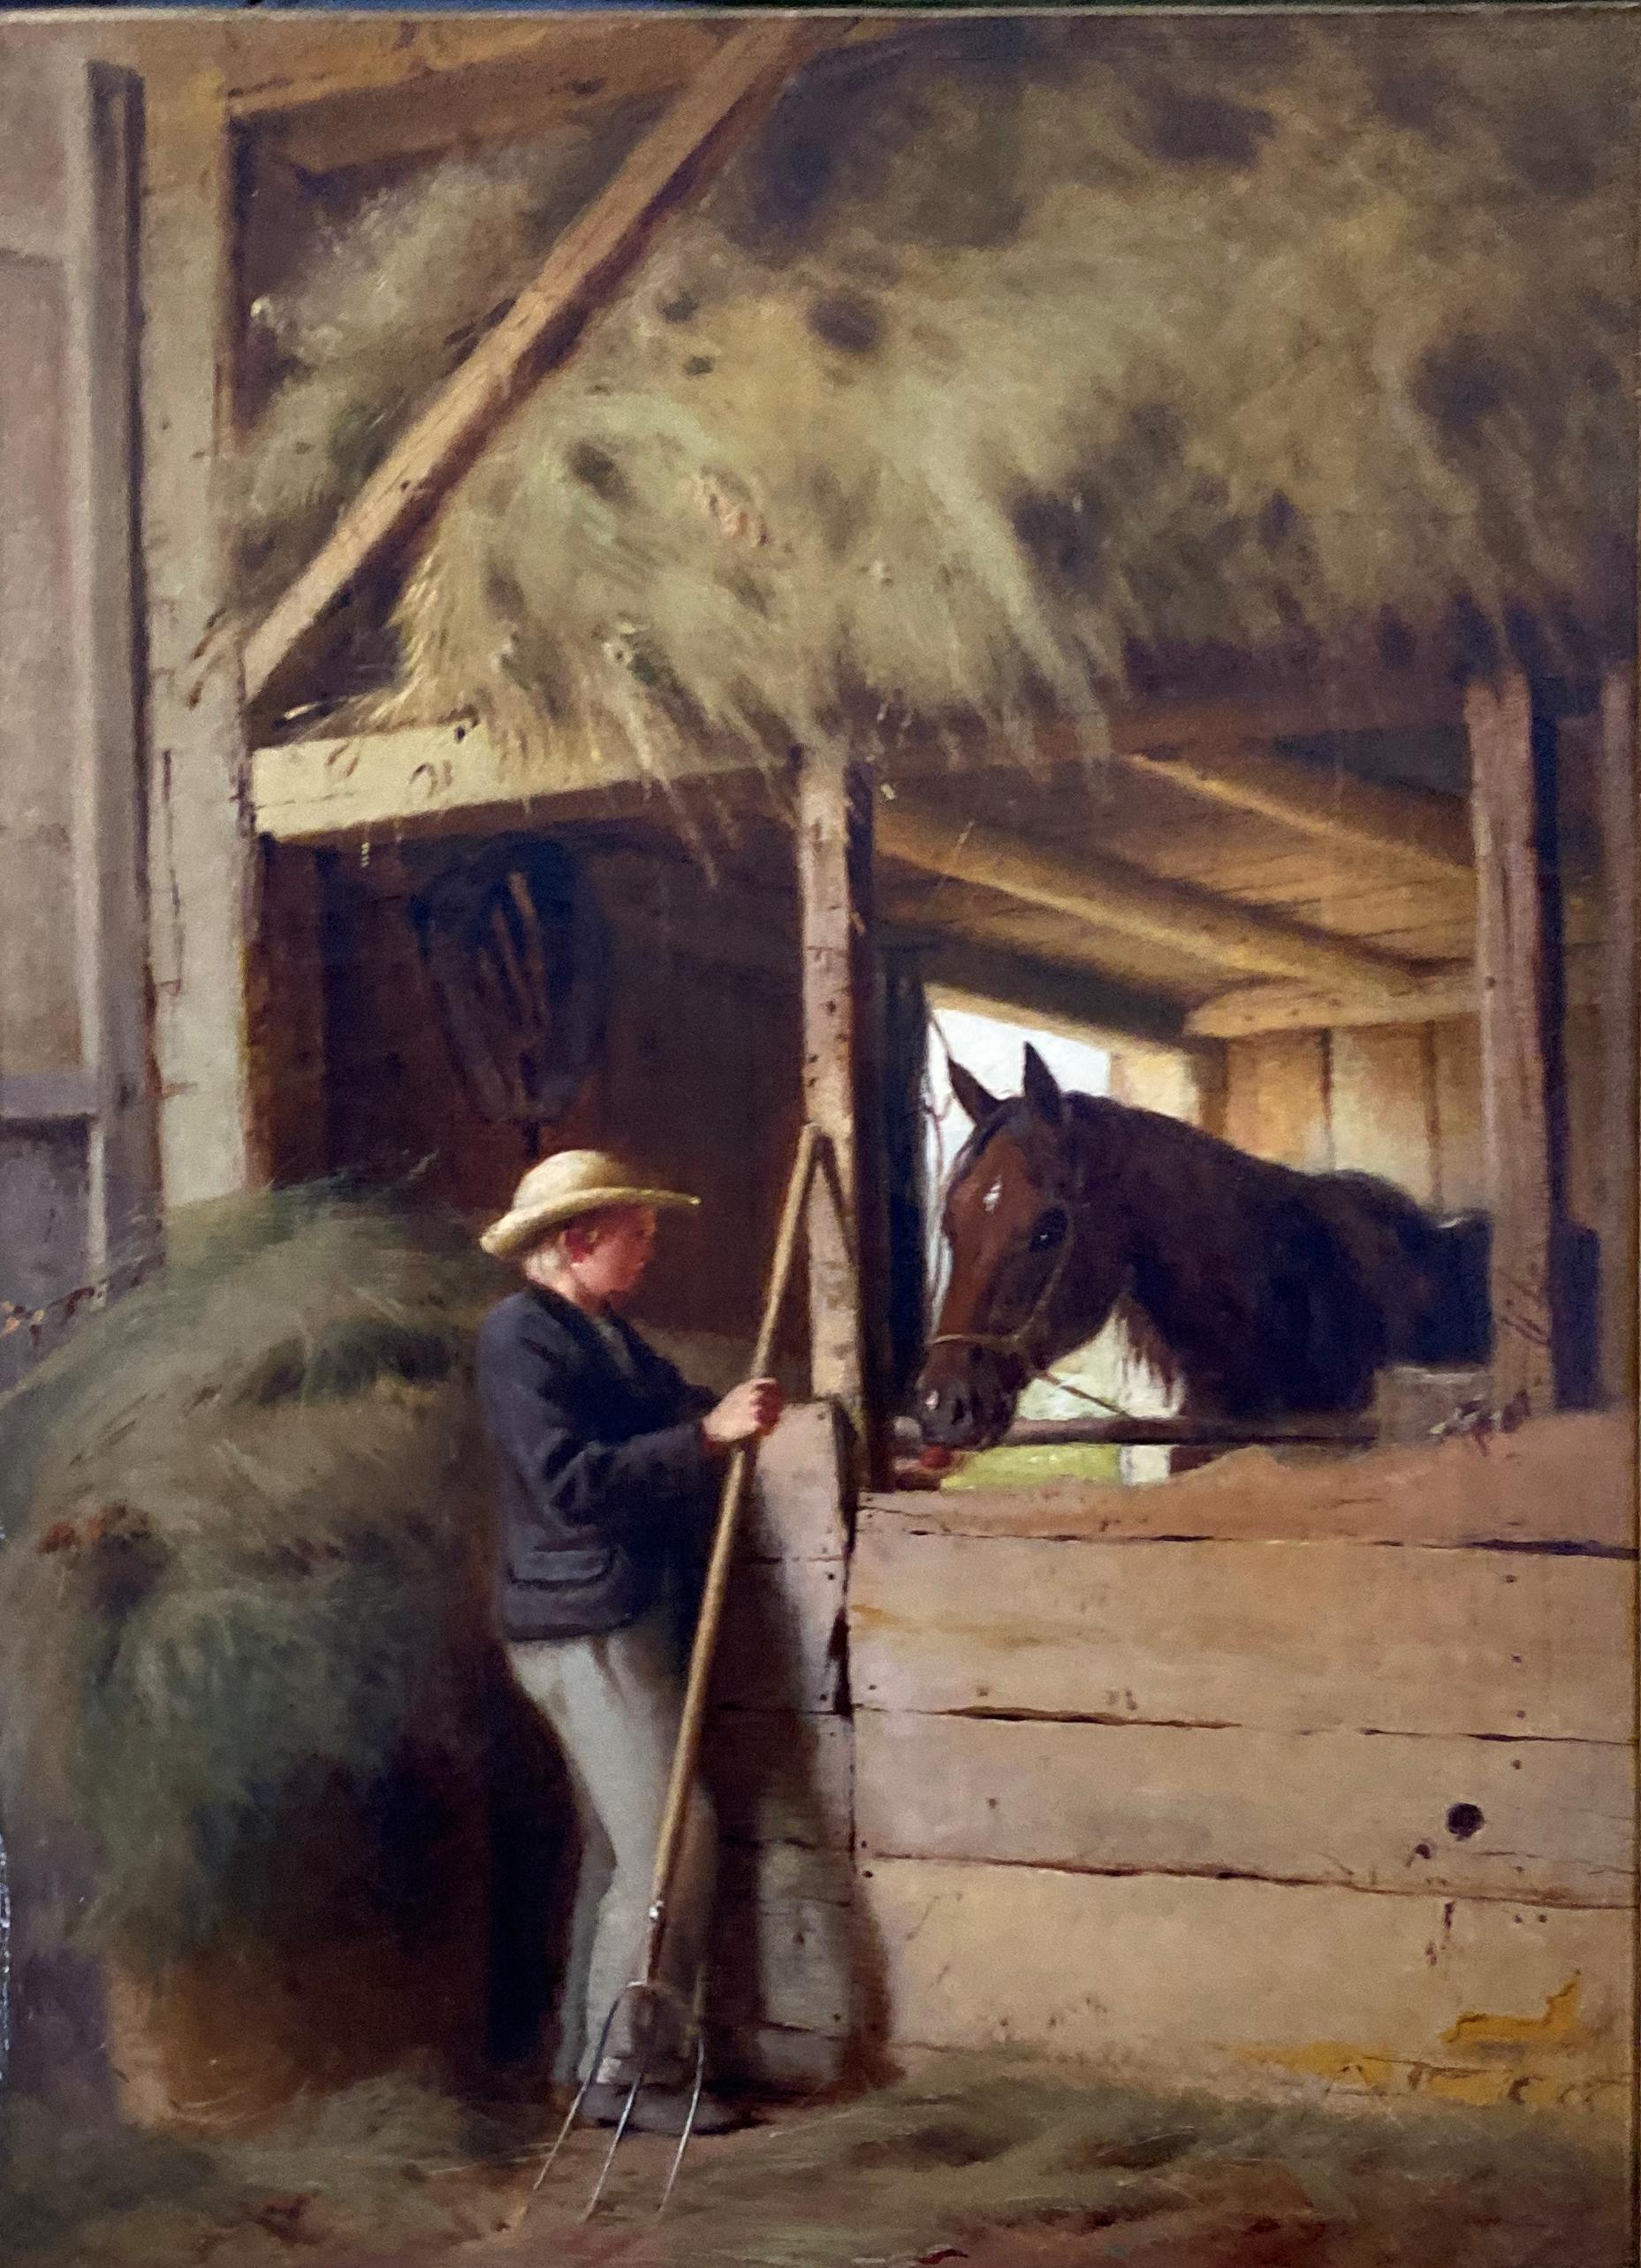 bargaining for a horse